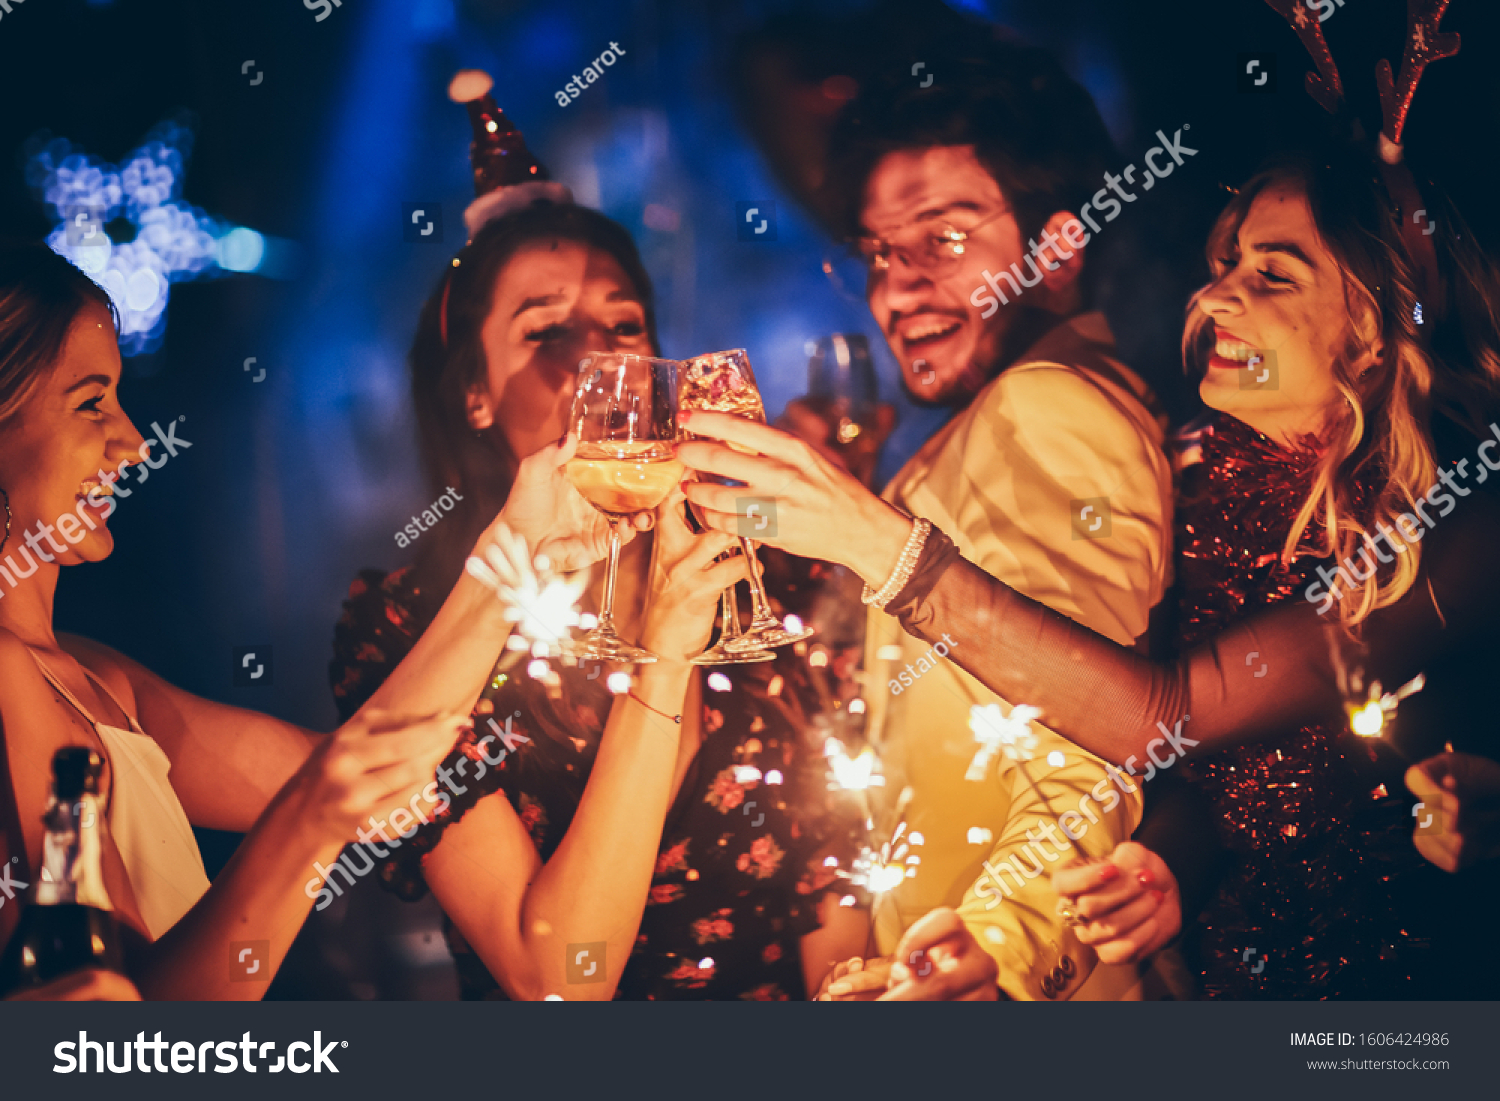 Group of friends having fun and holding sparklers at New Year's party #1606424986